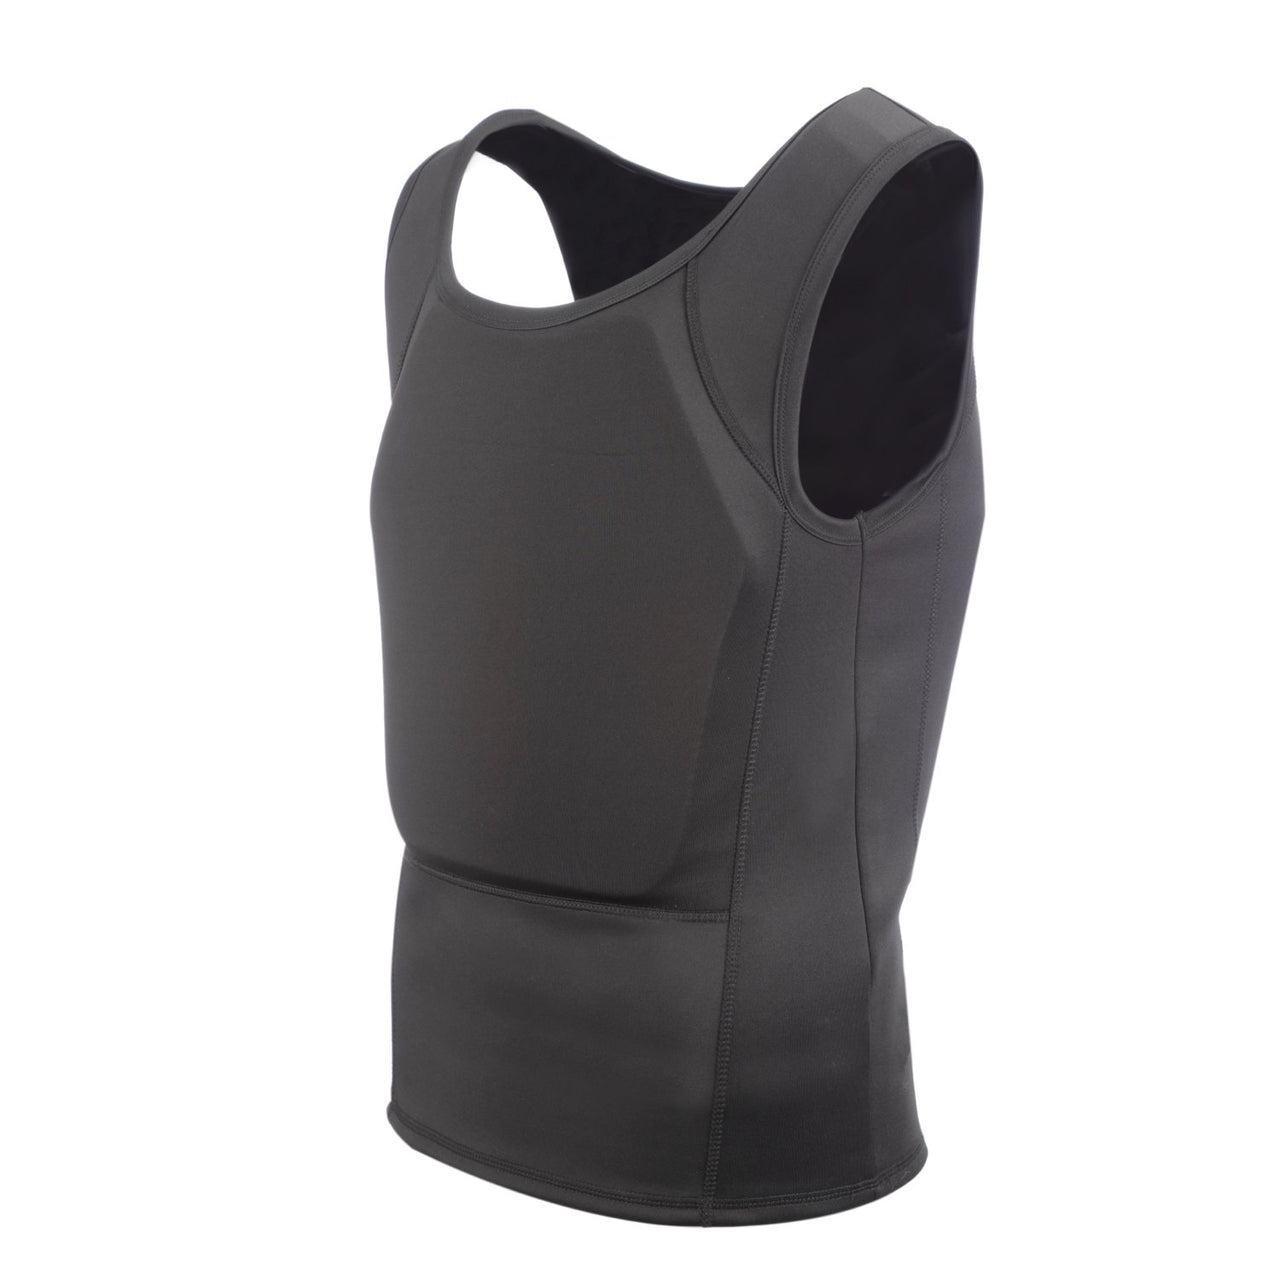 A Body Armor Direct Concealable Express T-Shirt Carrier vest on a white background.